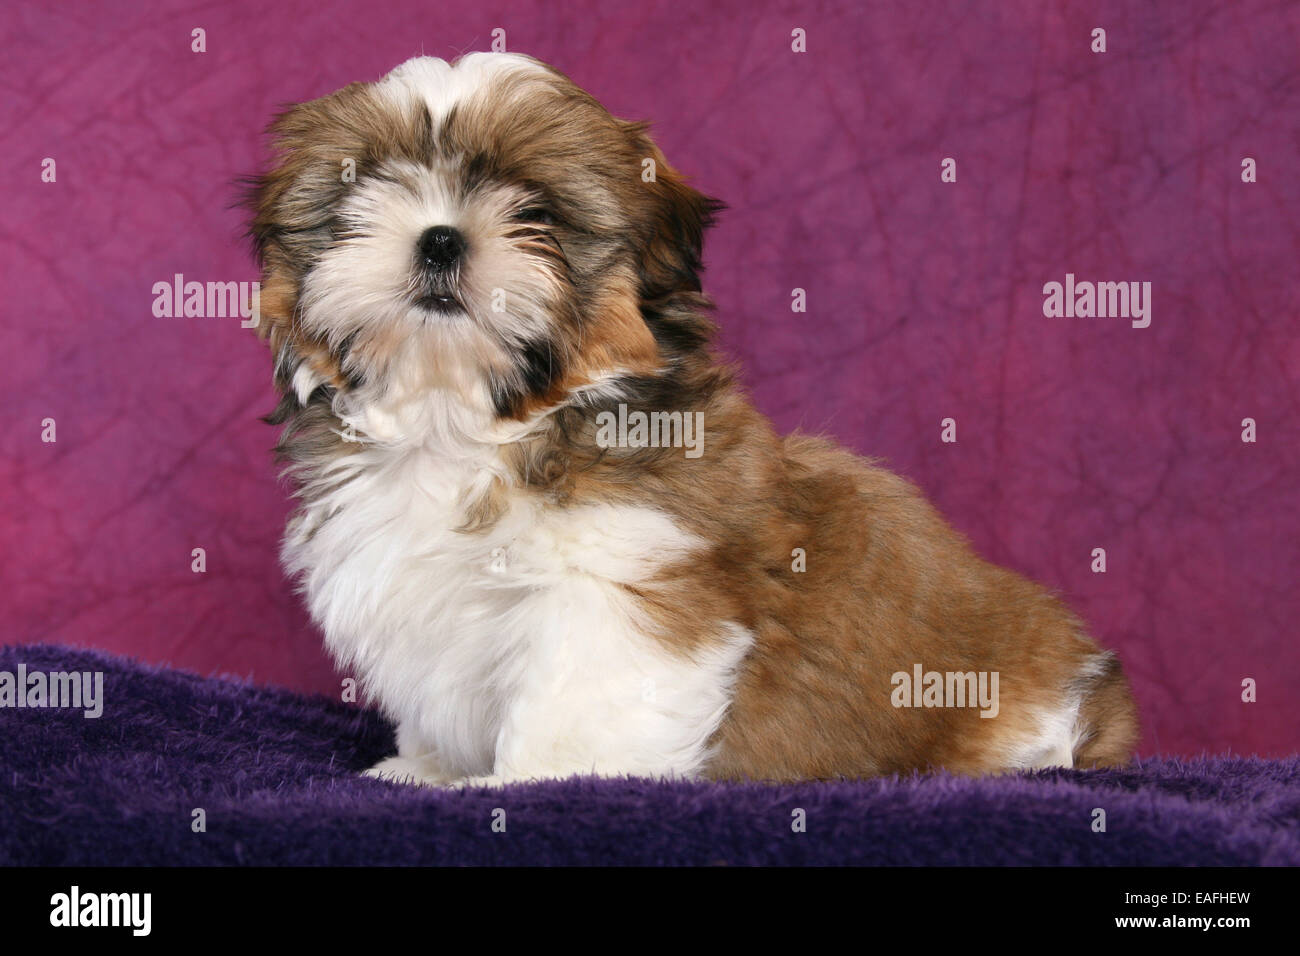 Little Furry Shih-tzu Pupy are Playing Stock Photo - Image of looking, shih:  57781930